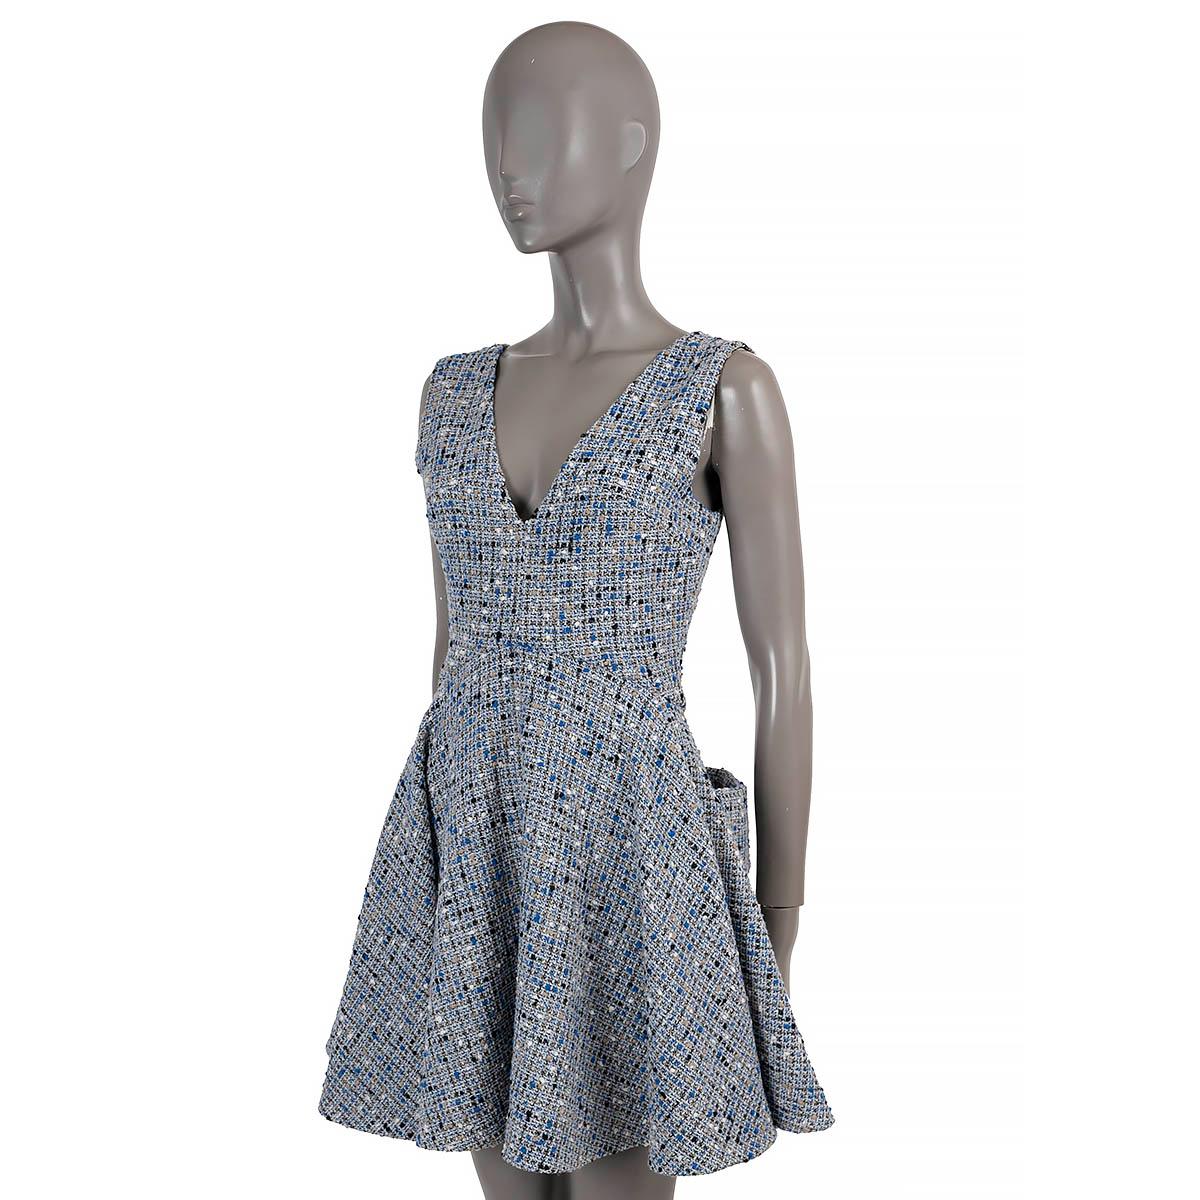 100% authentic Christian Dior sleeveless tweed dress in grey, white, beige, black and blue wool (89%) and polyamide (11%). Features a tailored V-neck top and flared skirt with two pockets on the back. Opens with a concealed zipper in the back and is